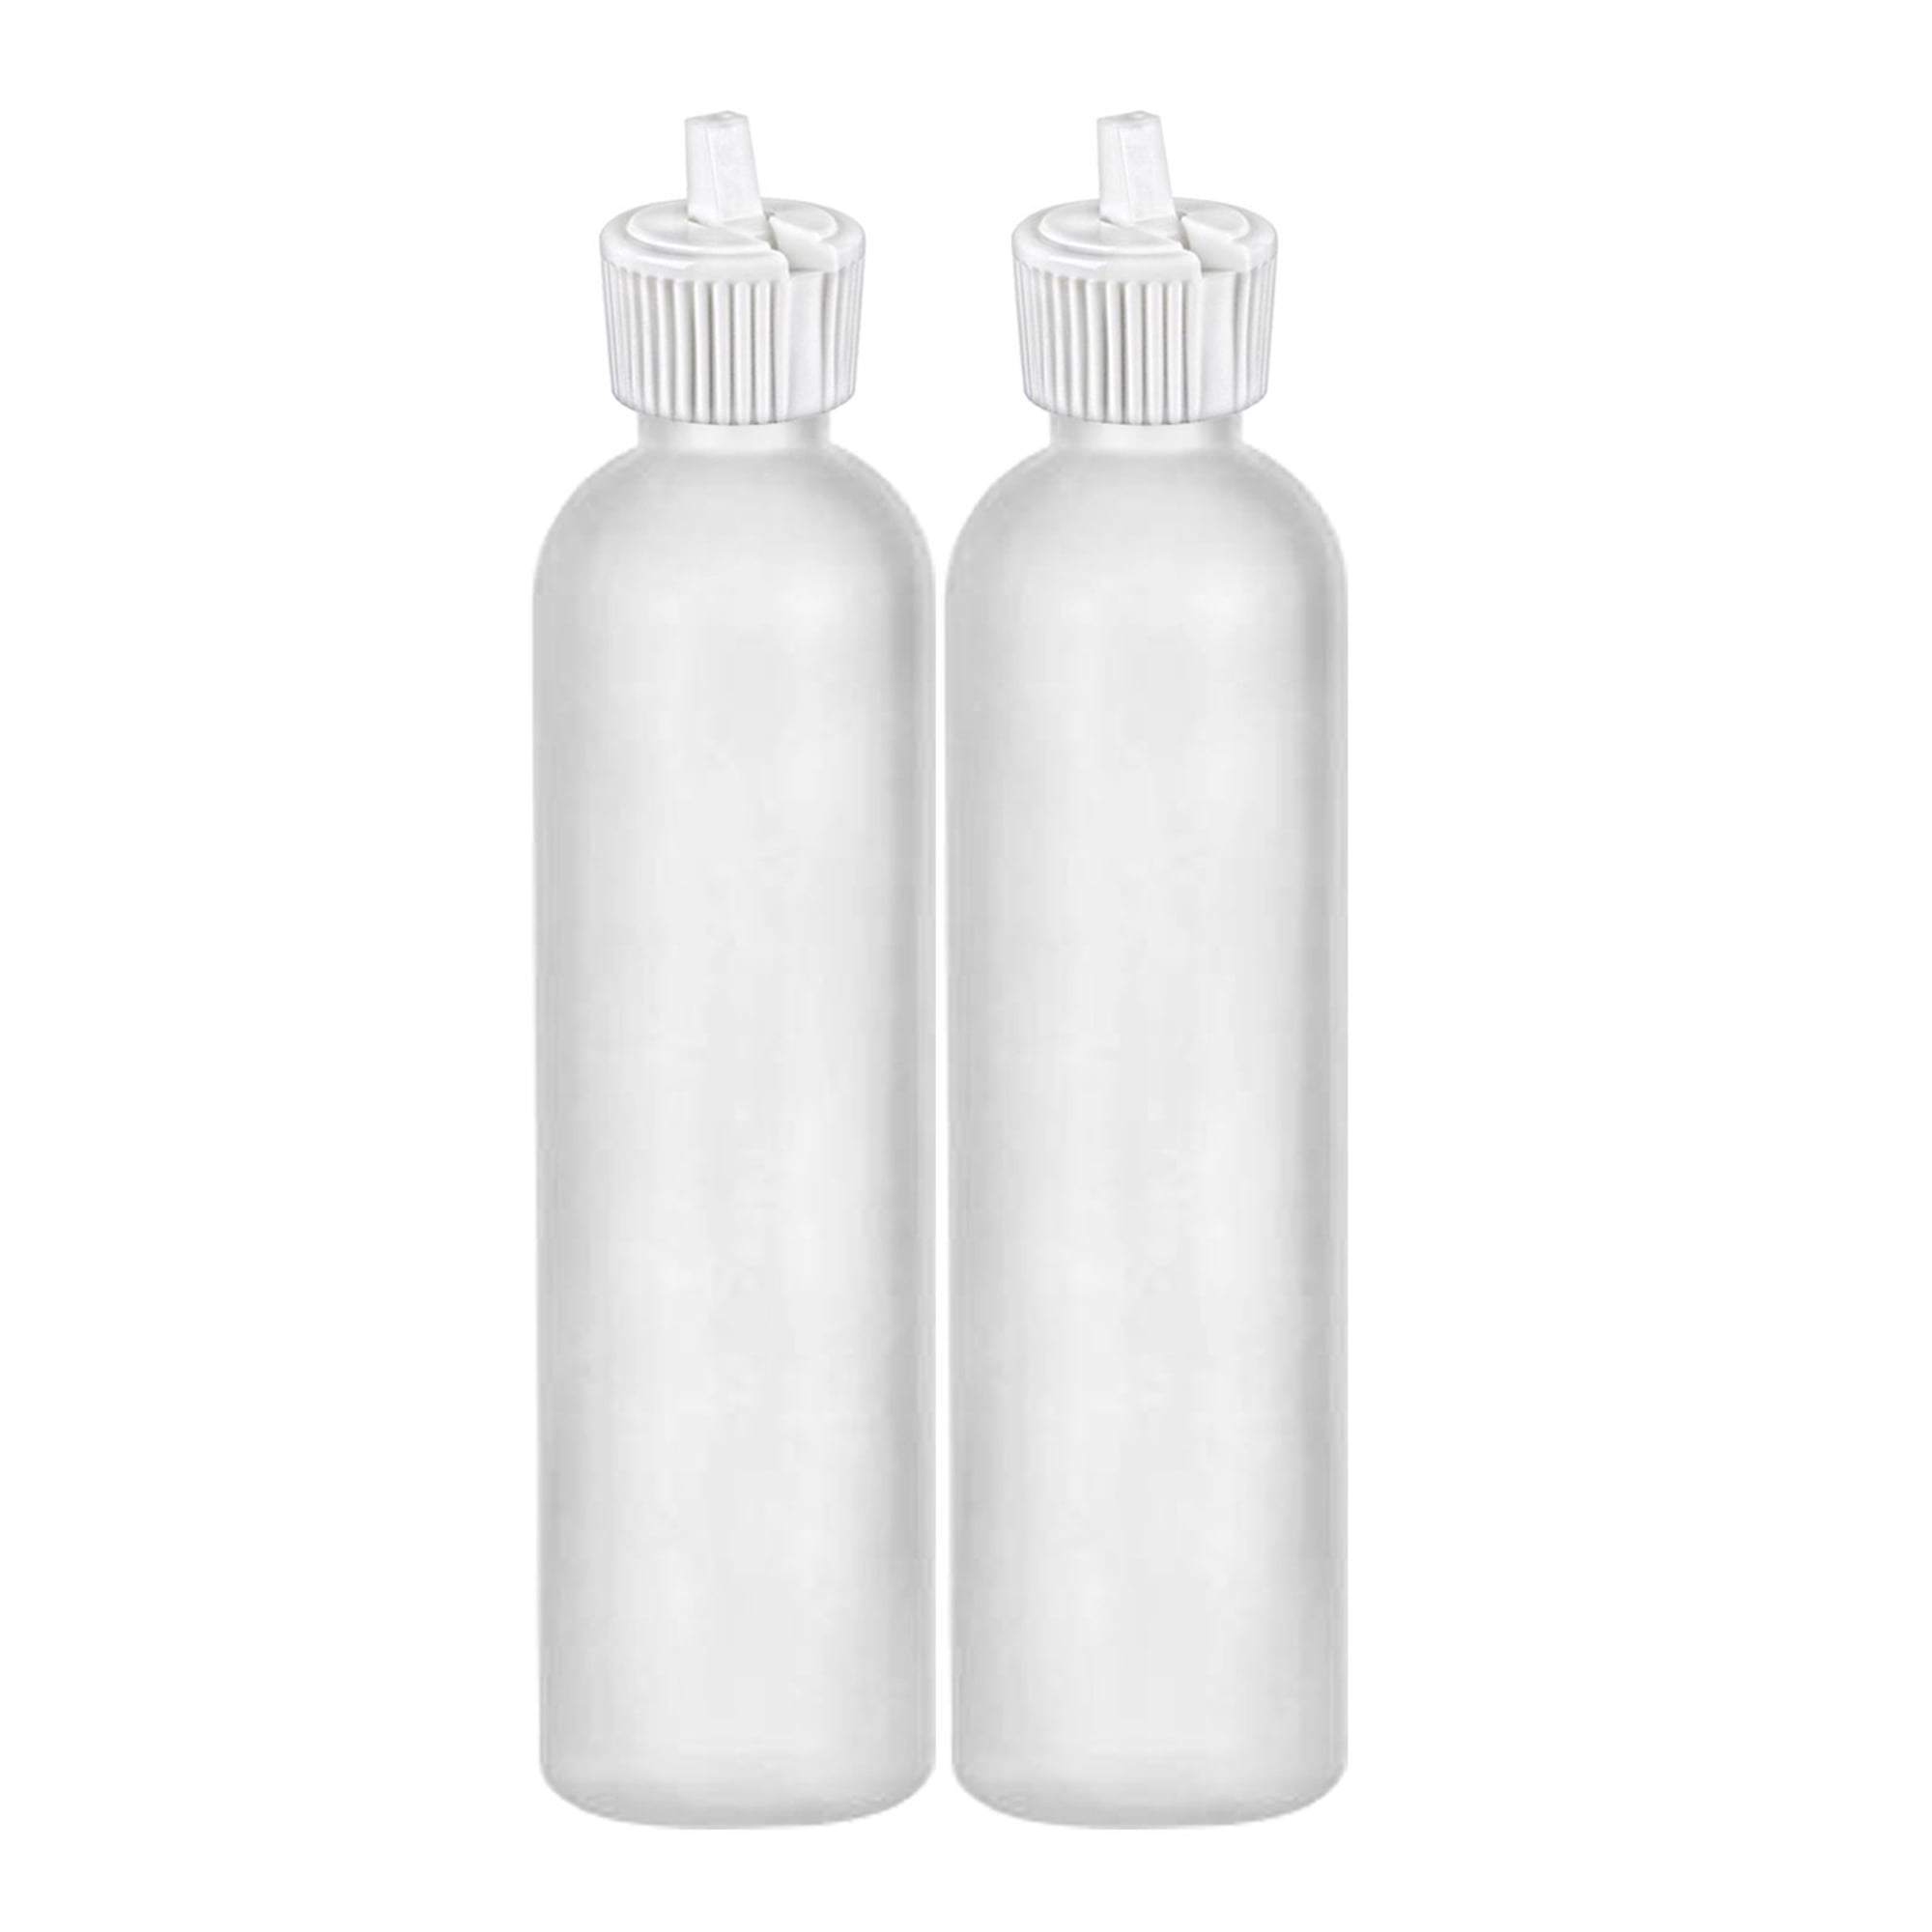 Upgraded 1000ml Plastic Spray Bottle ，2pcs All-Purpose Heavy Duty Empty  Spraying Mist Squirt Transparent Water Bottles for Cleaning Products Garden